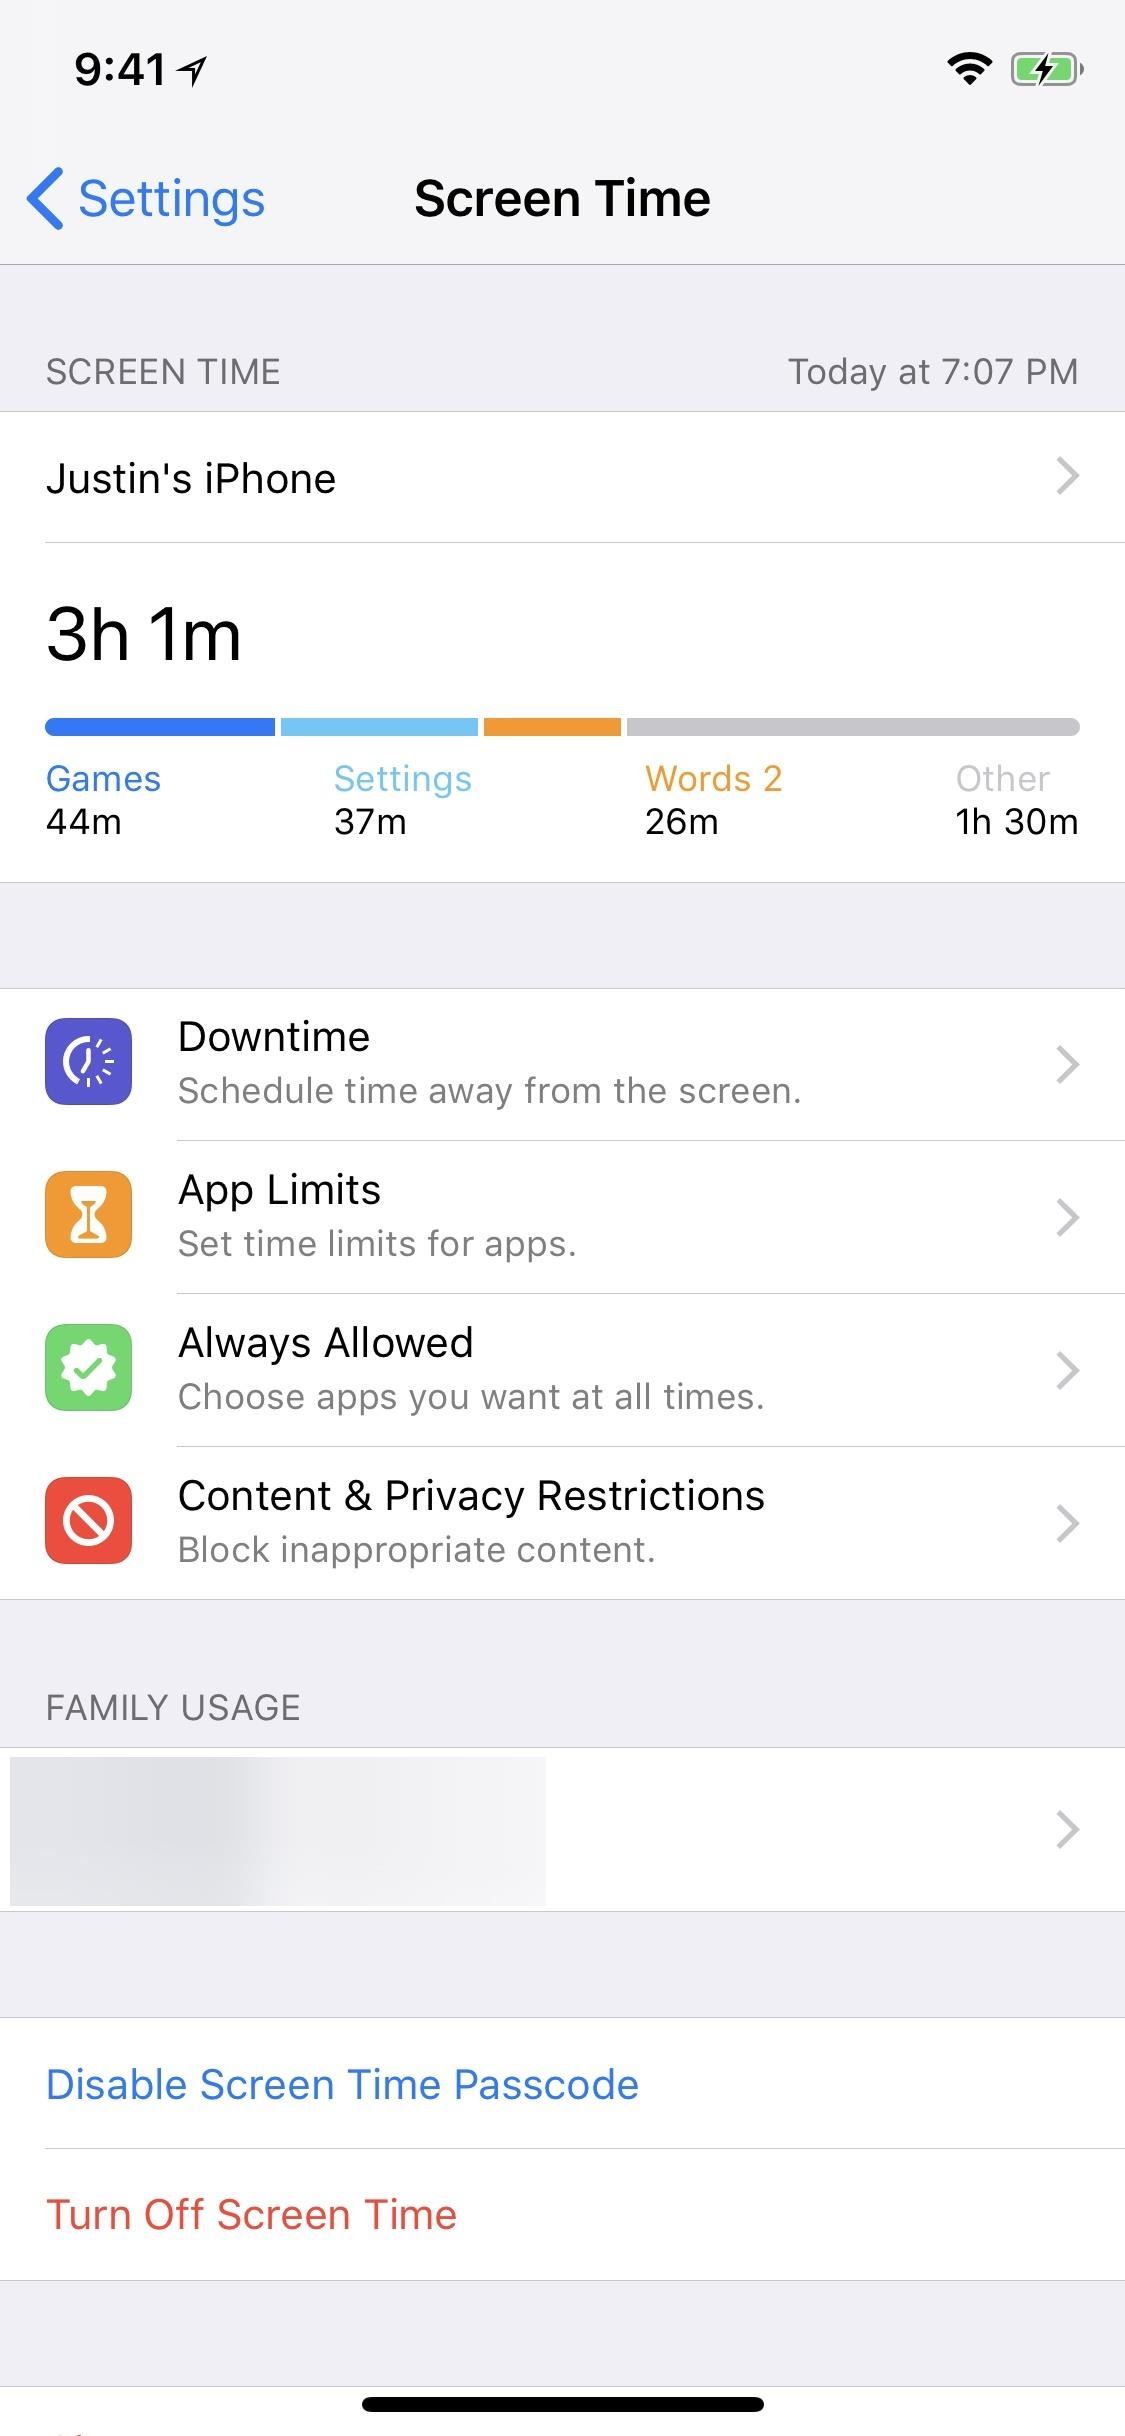 How to Access Your Screen Time Usage Stats Faster in iOS 12 for iPhone